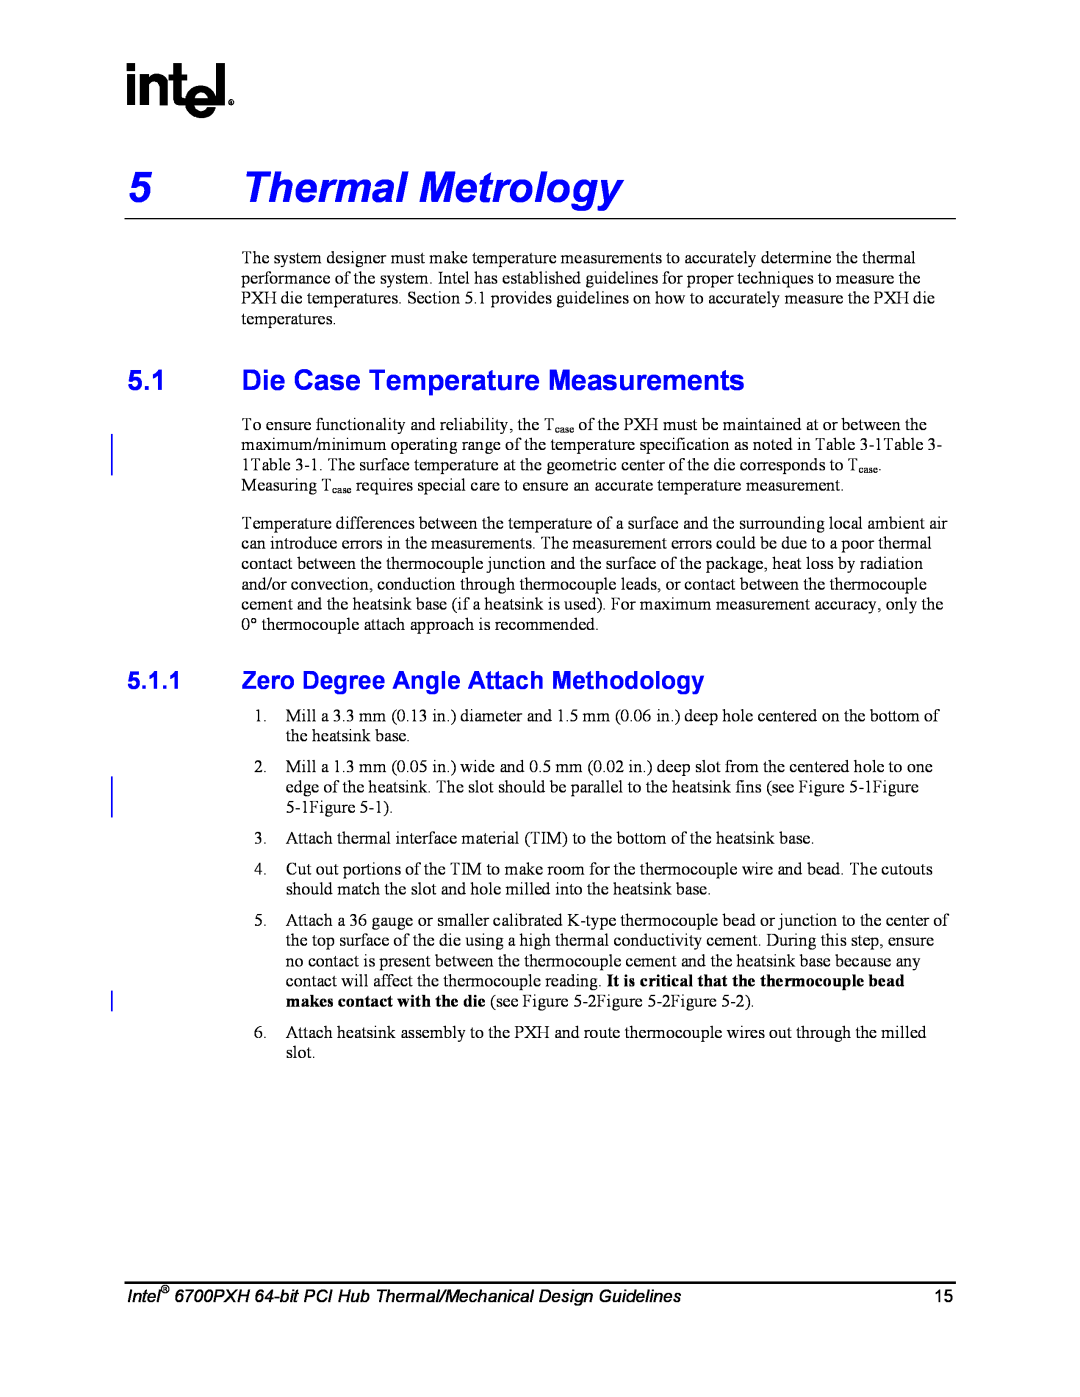 Intel 6700PXH manual Thermal Metrology, Die Case Temperature Measurements, Zero Degree Angle Attach Methodology 